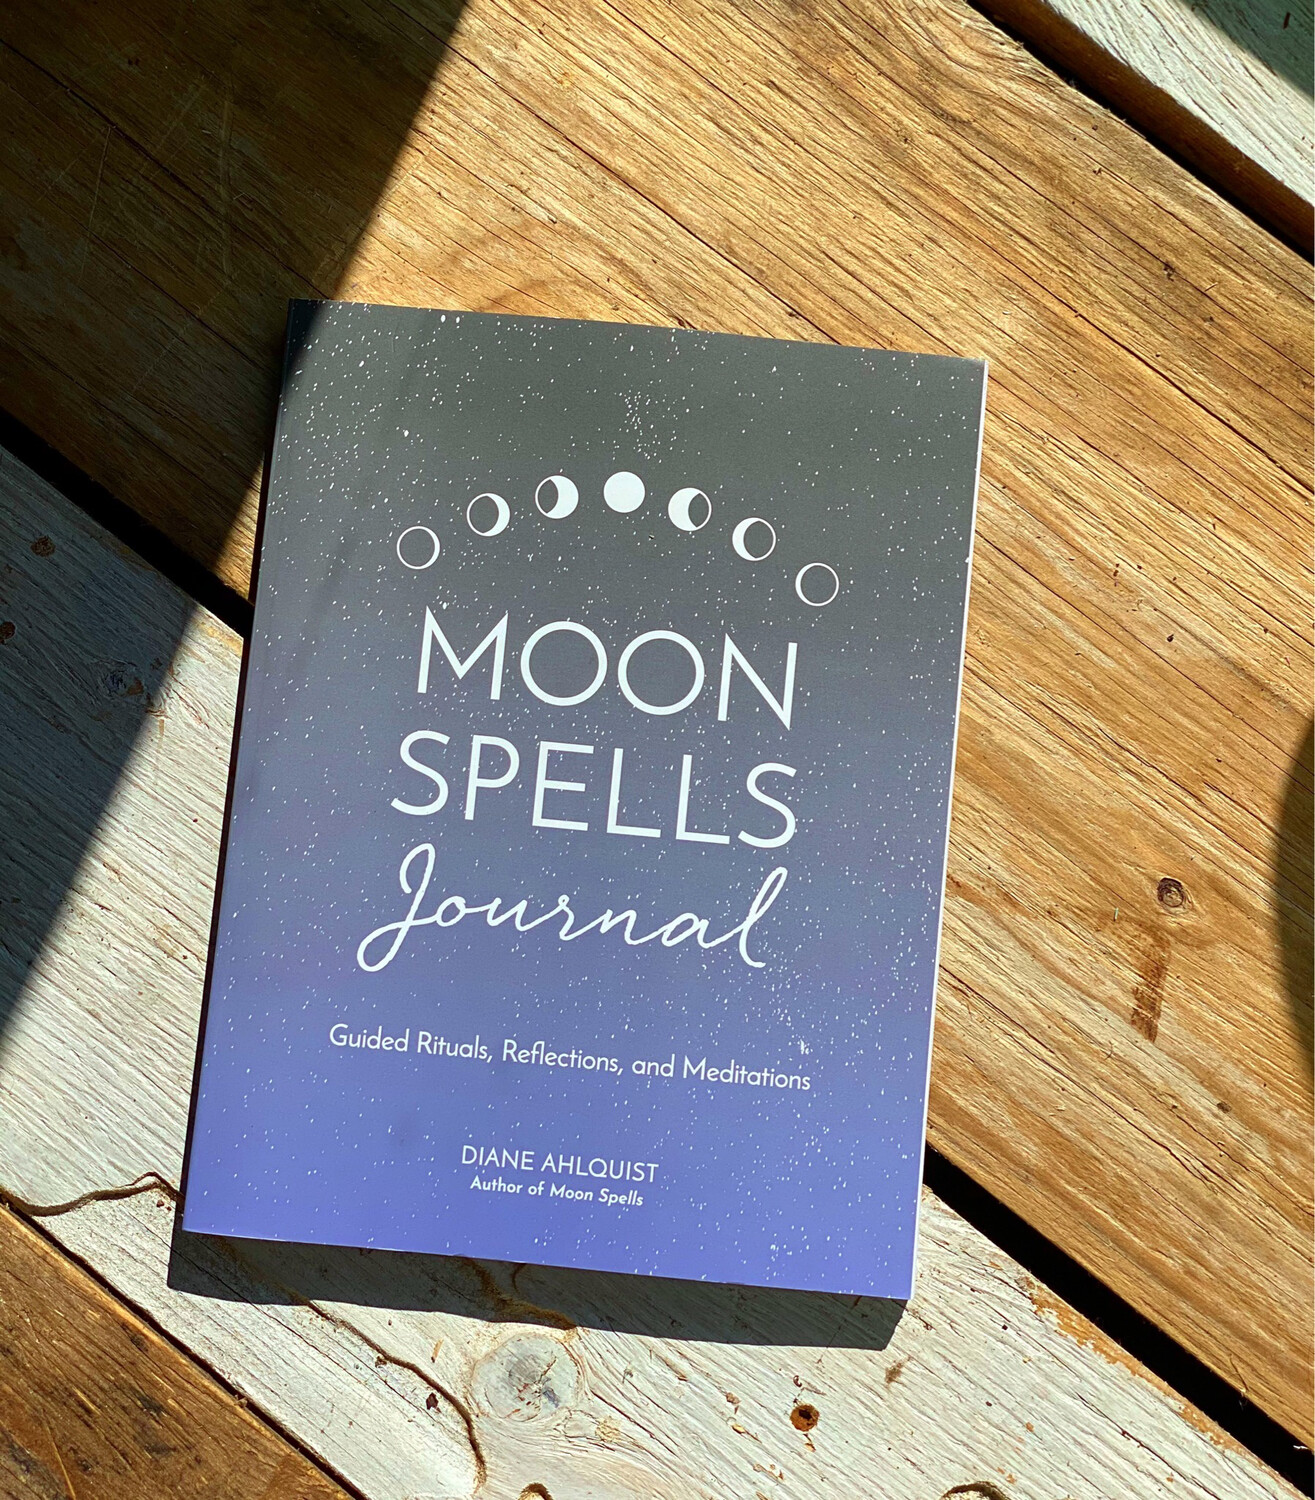 Moon Spells Journal, by Diane Ahlquist